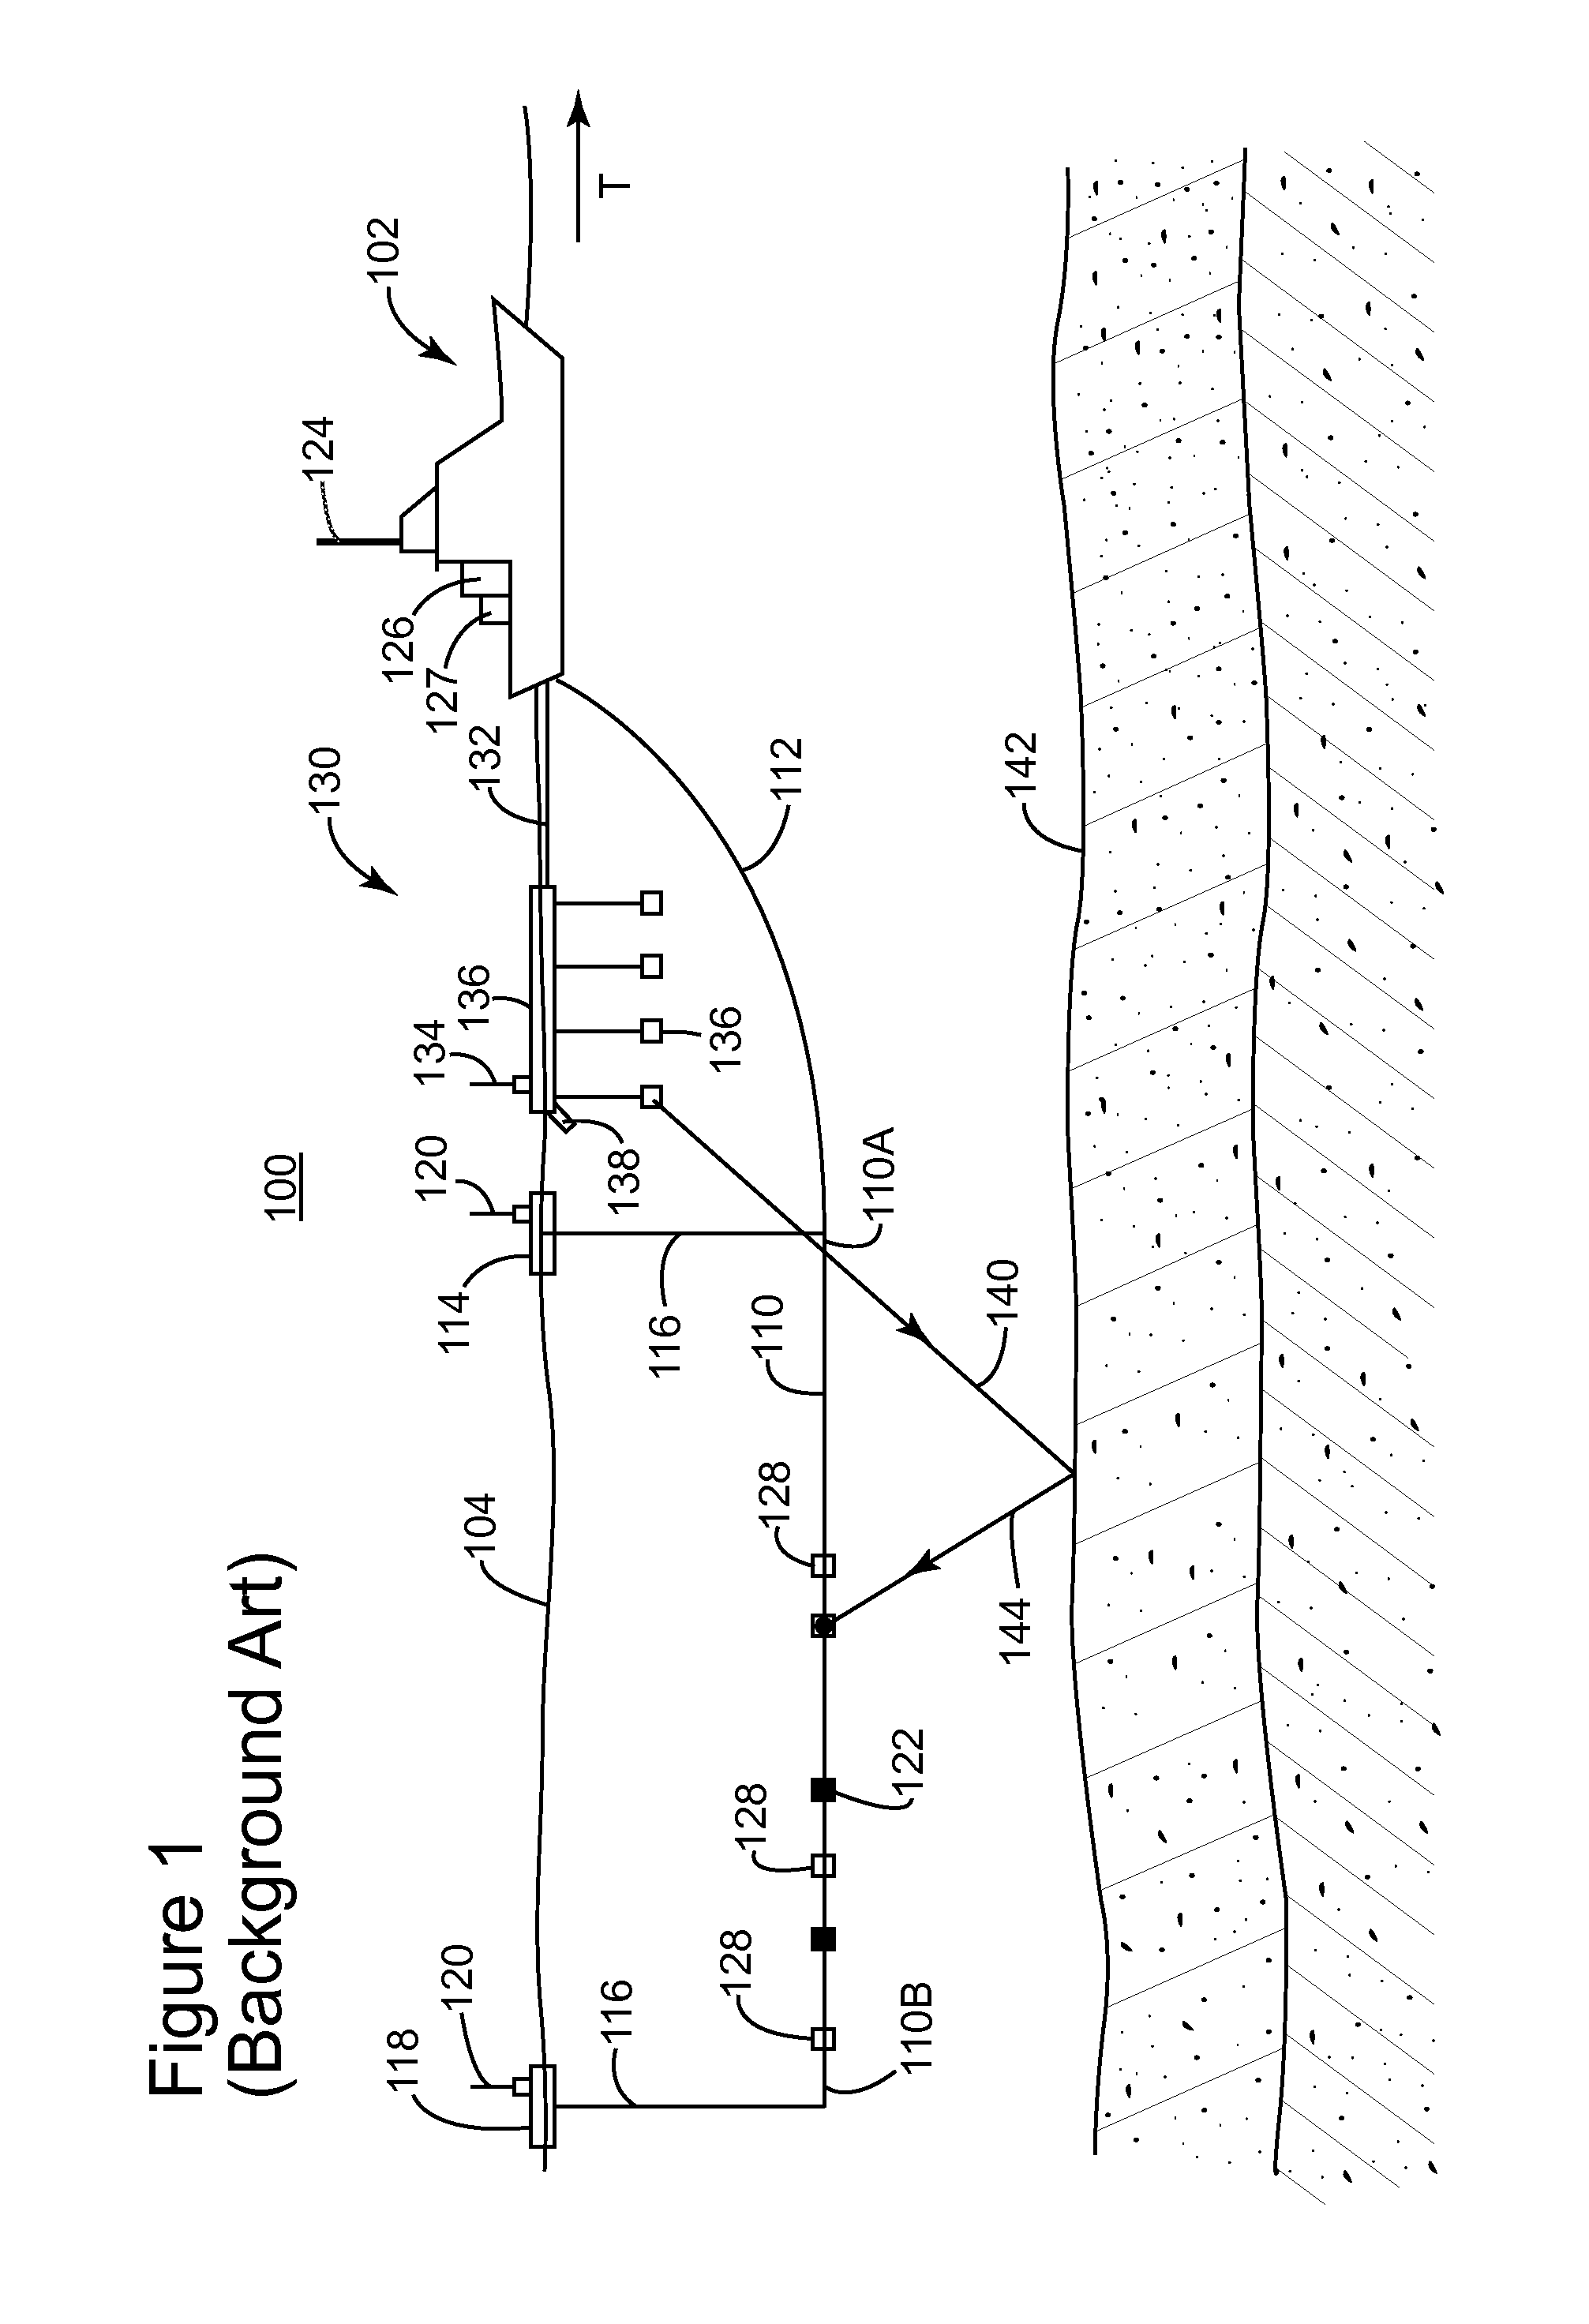 System and method for locating and positioning seismic source